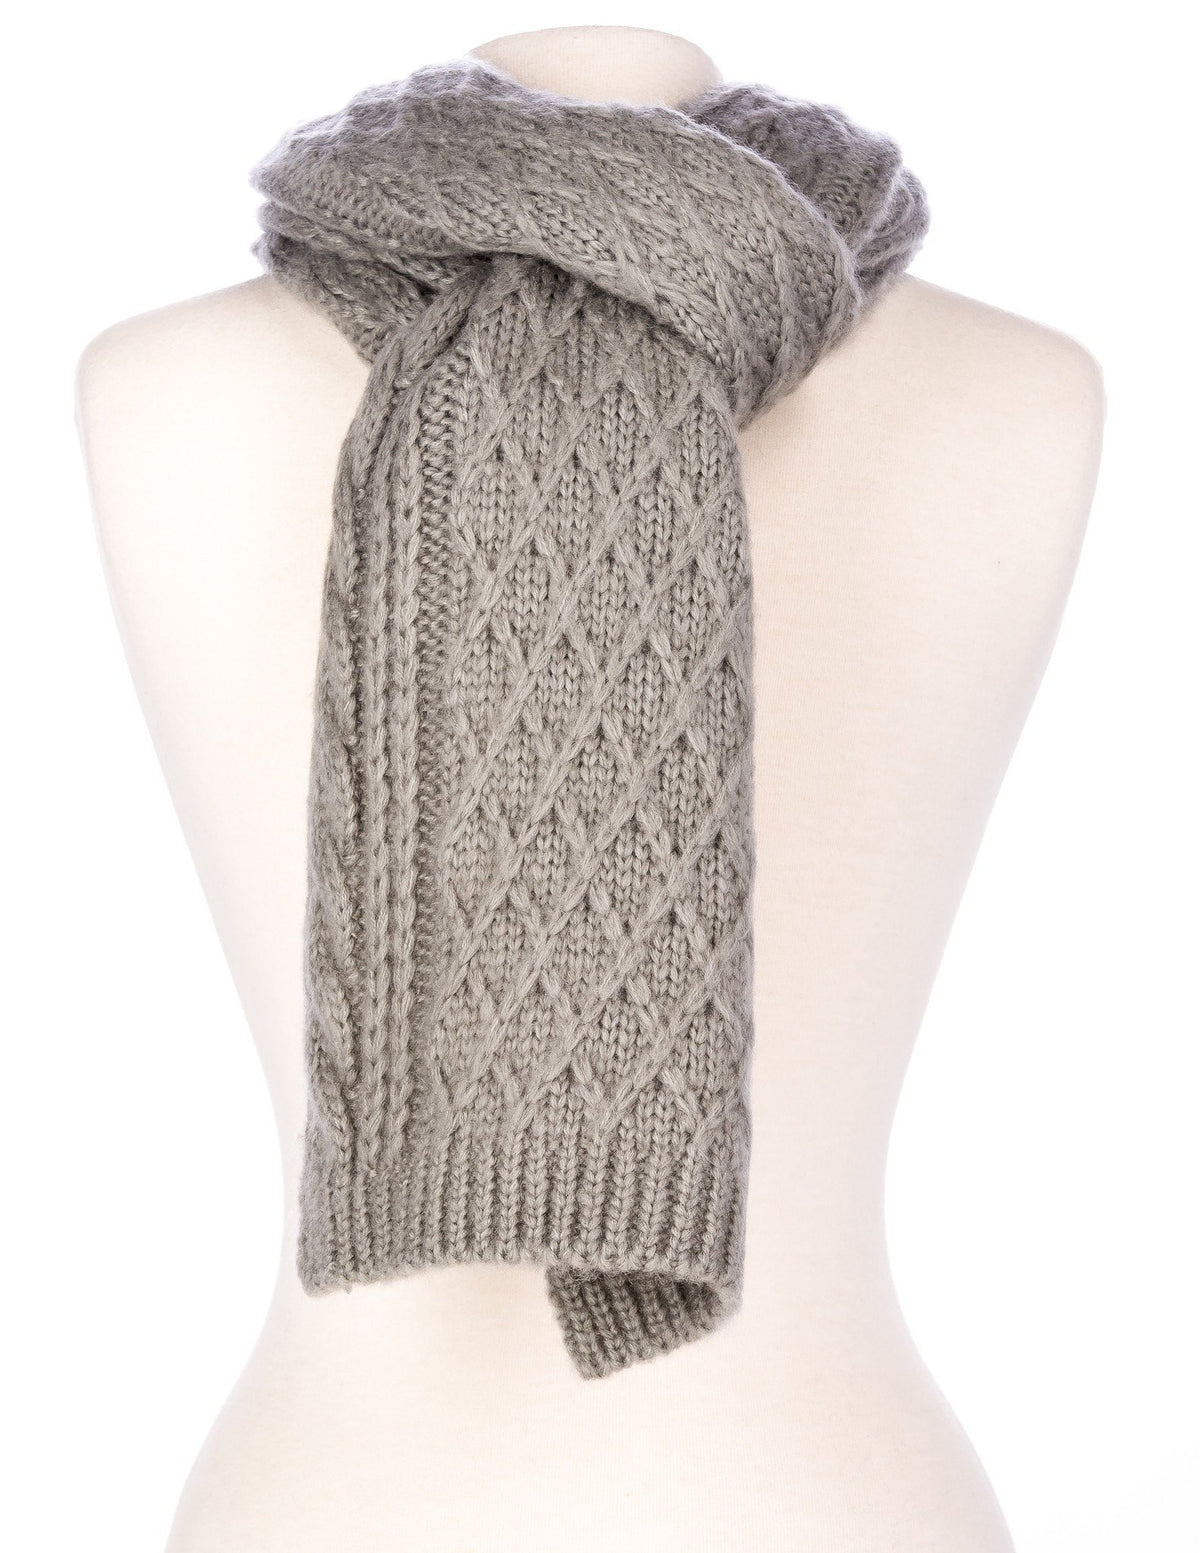 Men's Super-Soft Cable Knit Avalanche Winter Scarf - Grey